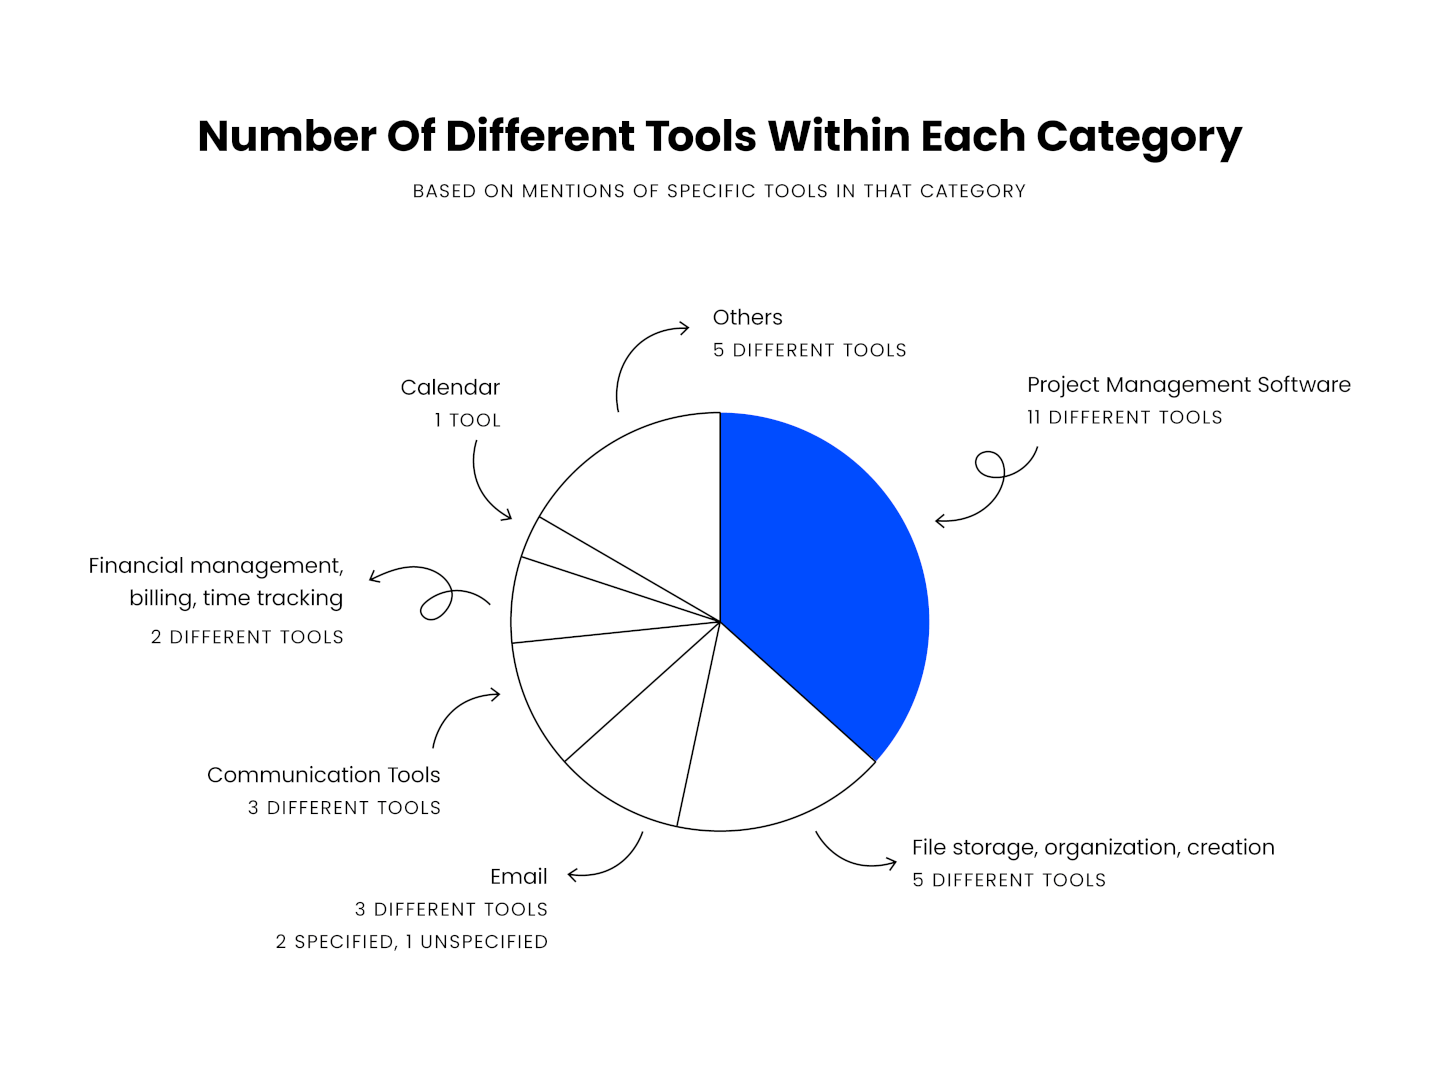 pie chart showing that project management software had the most different types of tools metioned